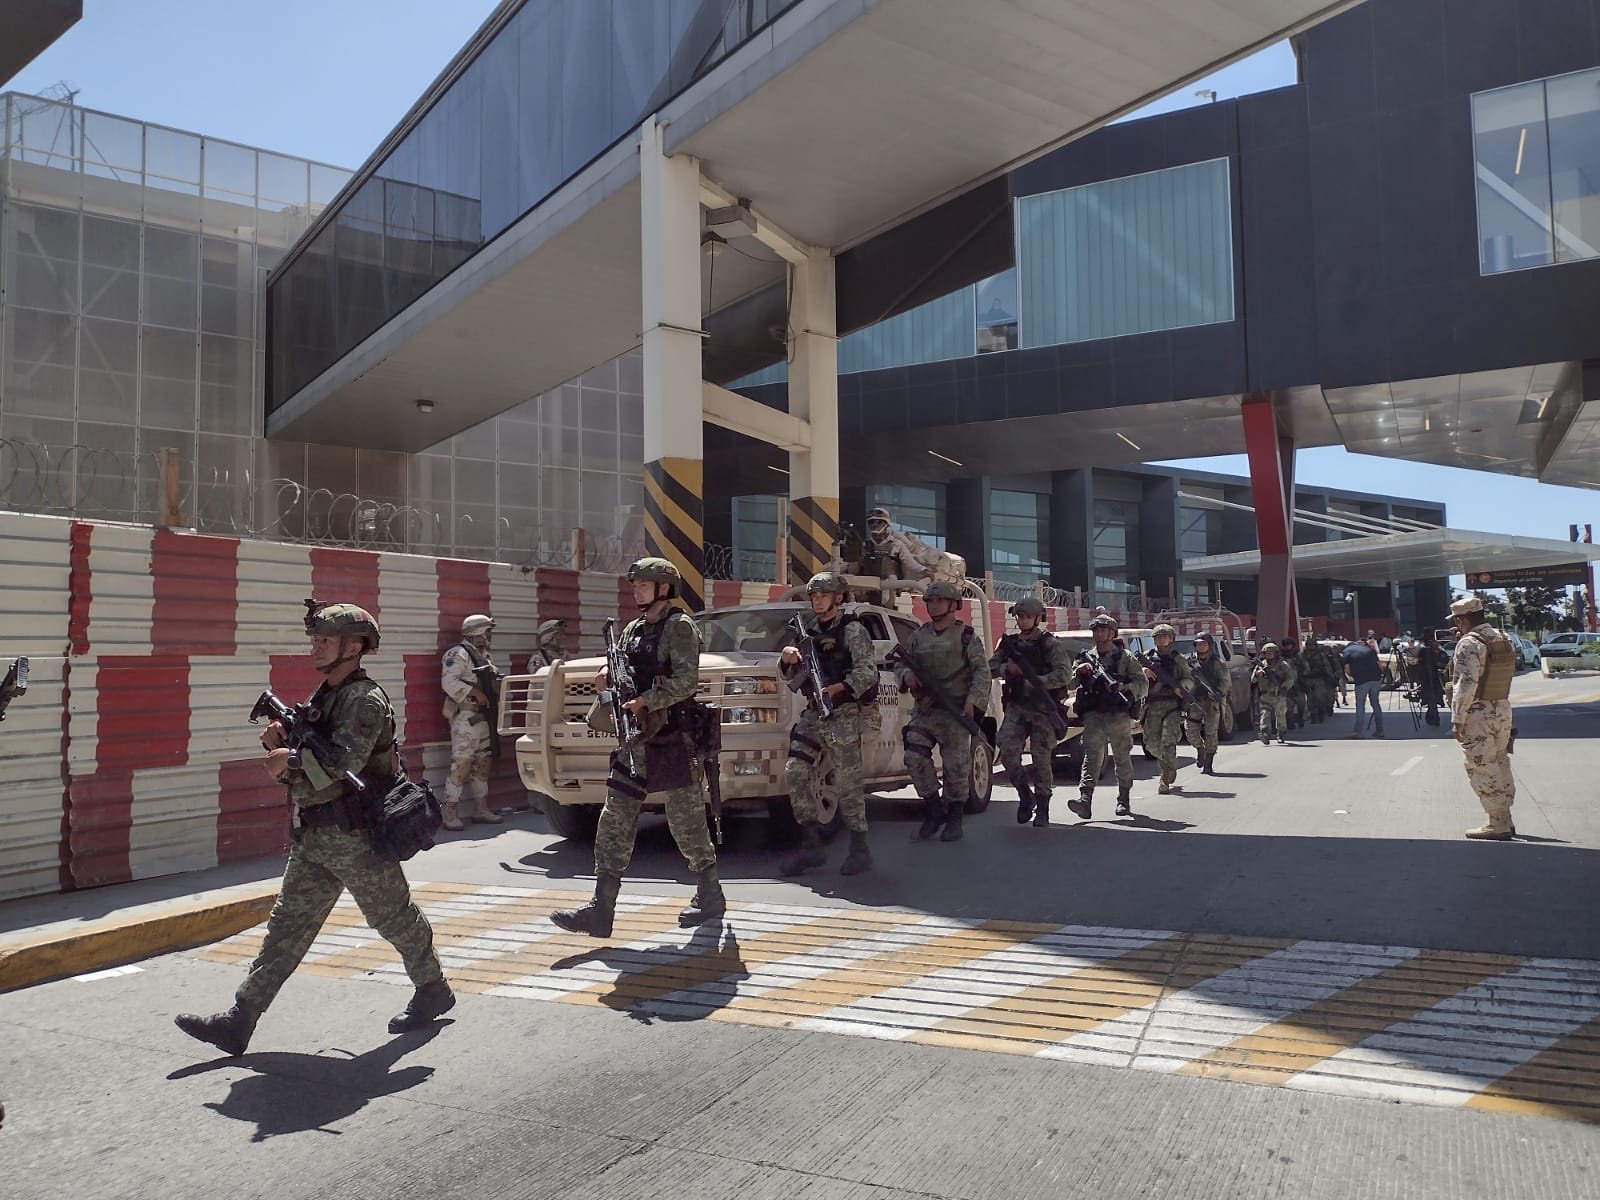 More than 300 elements of the military arrive in Tijuana